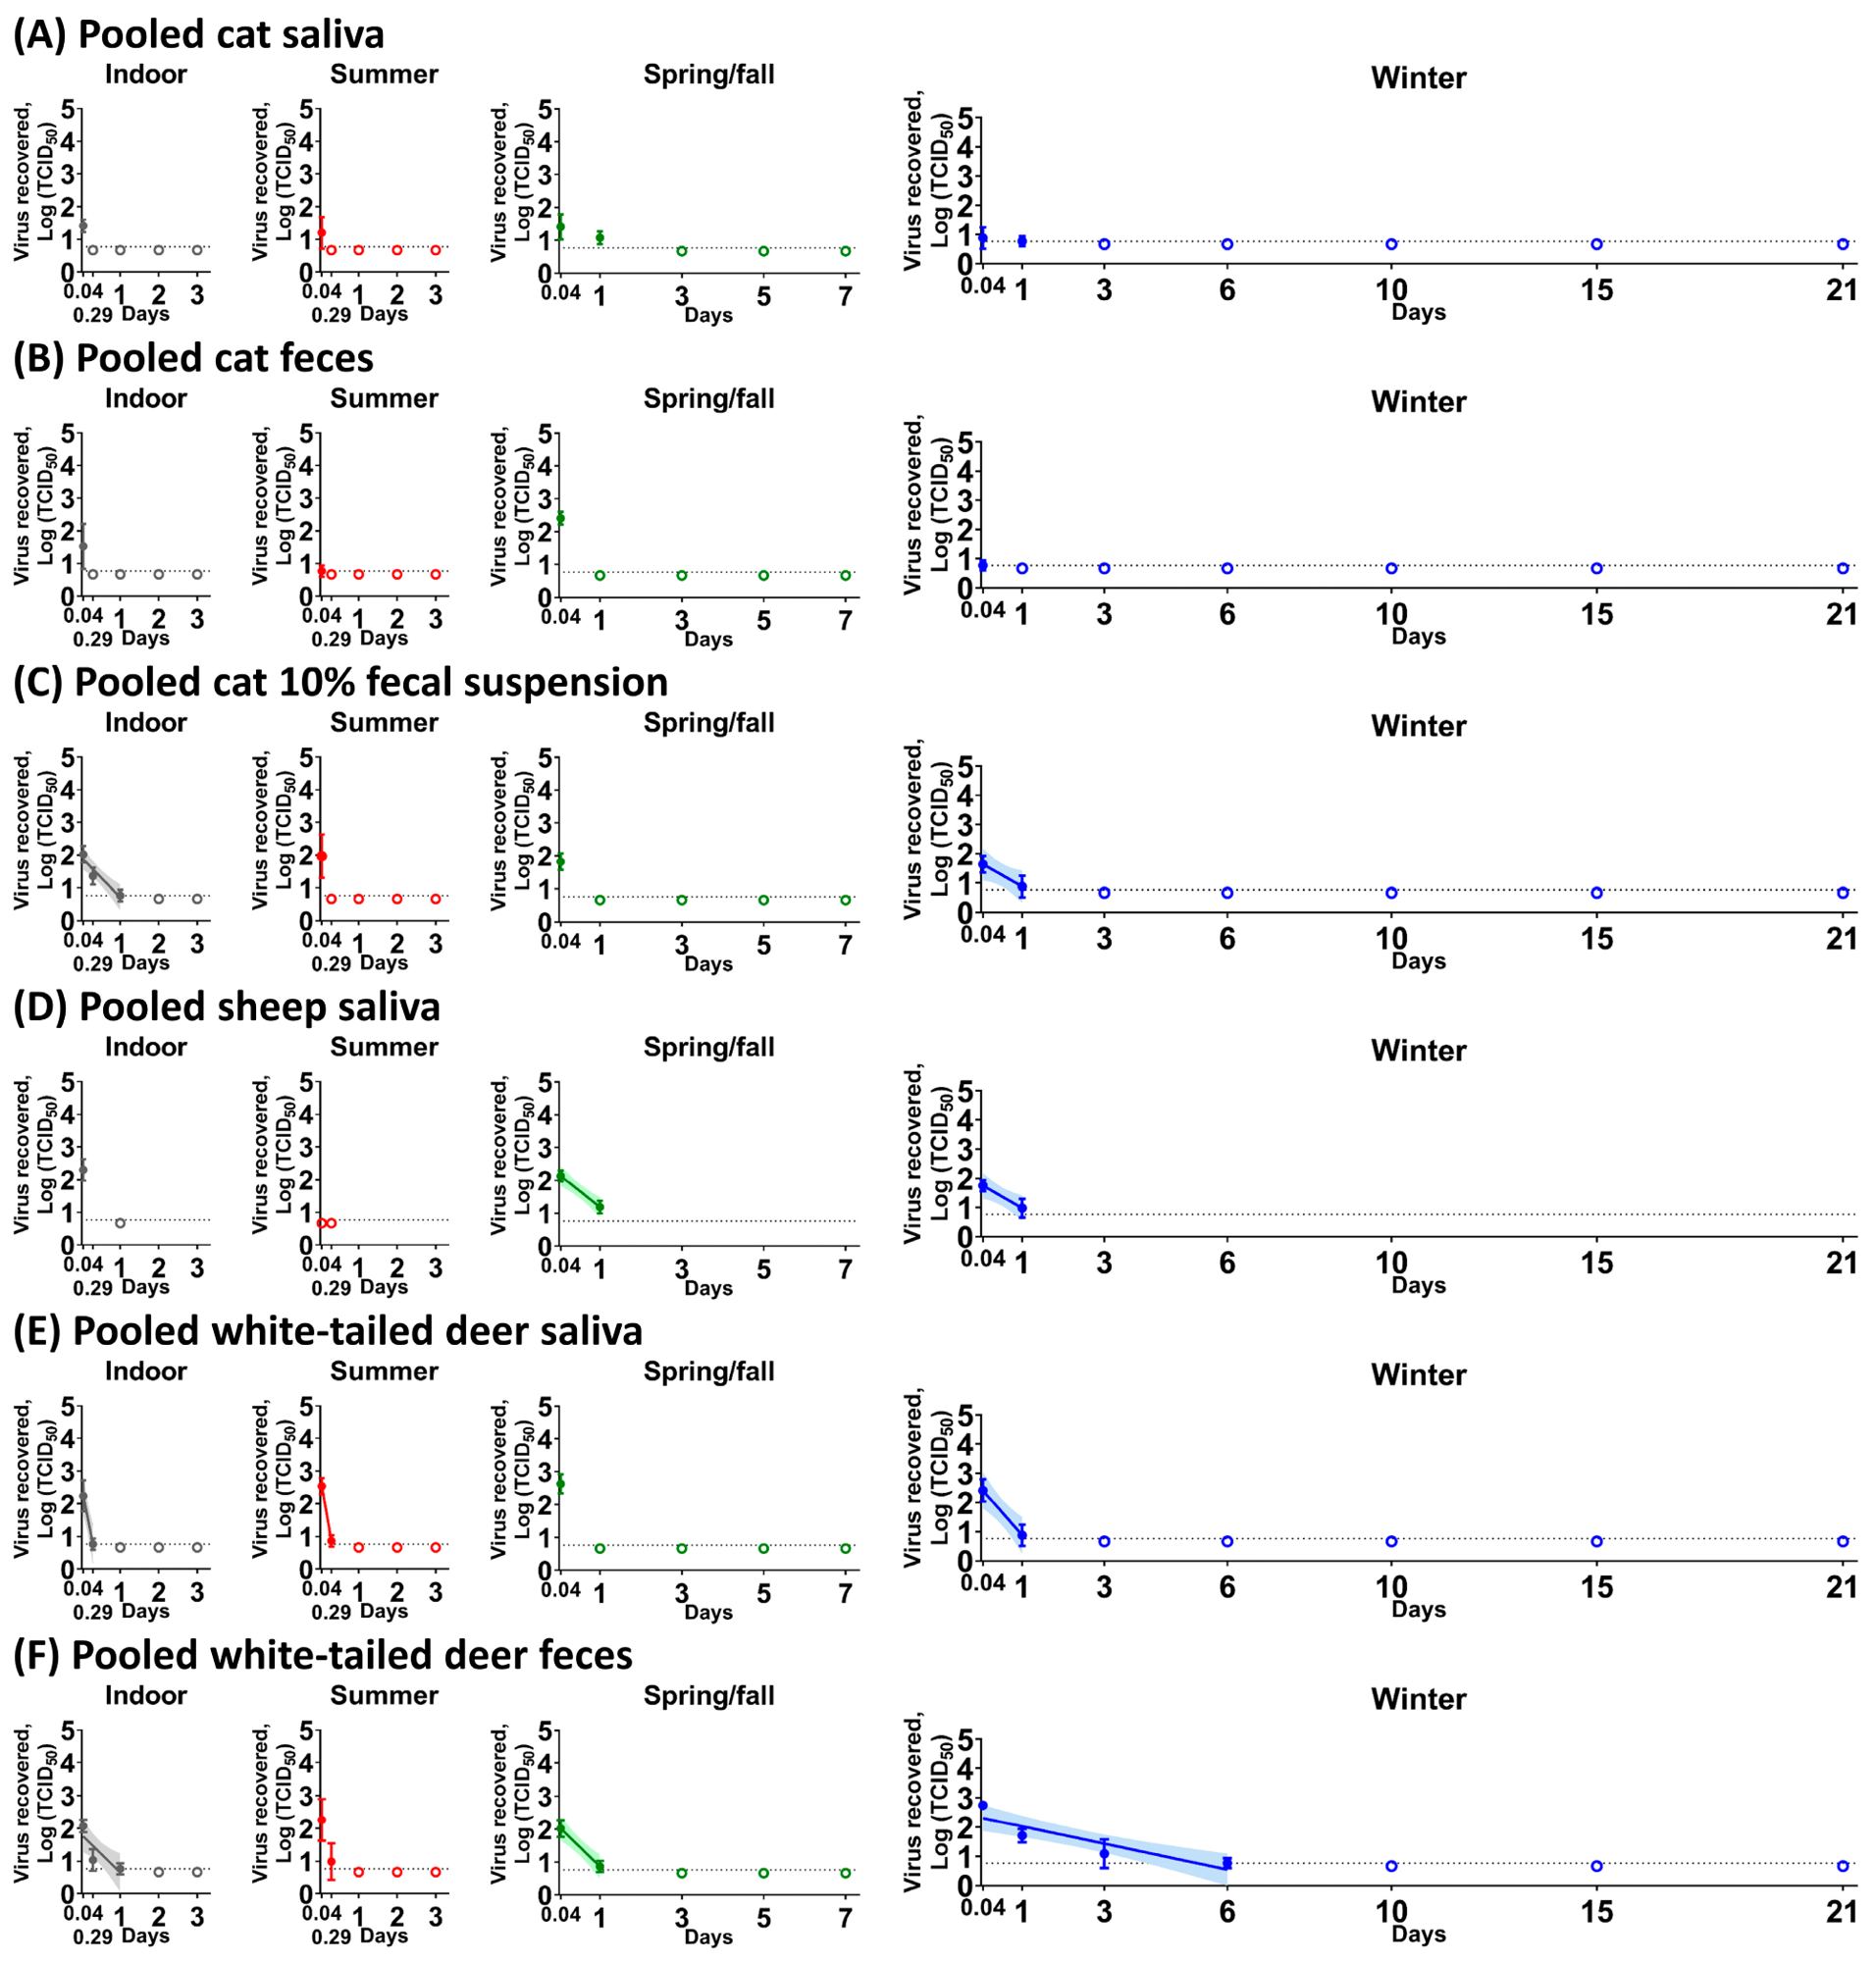 SARS-CoV-2 stability in pooled cat saliva (A), pooled cat feces (B), pooled cat 10% fecal suspension (C), pooled sheep saliva (D), pooled white-tailed deer saliva (E), and pooled white-tailed deer feces (F). Each biological fluid was spiked with 5 × 104 TCID50 of SARS-CoV-2 and incubated under indoor (gray), summer (red), spring/fall (green), and winter (blue) conditions. At each time point, the virus was recovered and titrated on Vero E6 cells. The simple linear regression was estimated when the infectious virus was at least present at two different time points. The virus titer is represented as the mean and standard deviation of log transformed TCID50 titers (colored circle), whereas empty colored circles represent negatives in triplicate. Colored lines and their shaded areas represent a best-fit line and 95% confidence interval of the simple linear regression. On the x-axis, 0.04 and 0.29 days are equal to 1 and 7 h, respectively. Due to insufficient volume of pooled sheep saliva (D), the virus stability was observed at two time points. The best-fit line was not shown in pooled cat saliva under spring/fall and winter conditions (A), and pooled white-tailed deer feces under summer conditions (F) because the slope of simple linear regression was not significantly different than zero.